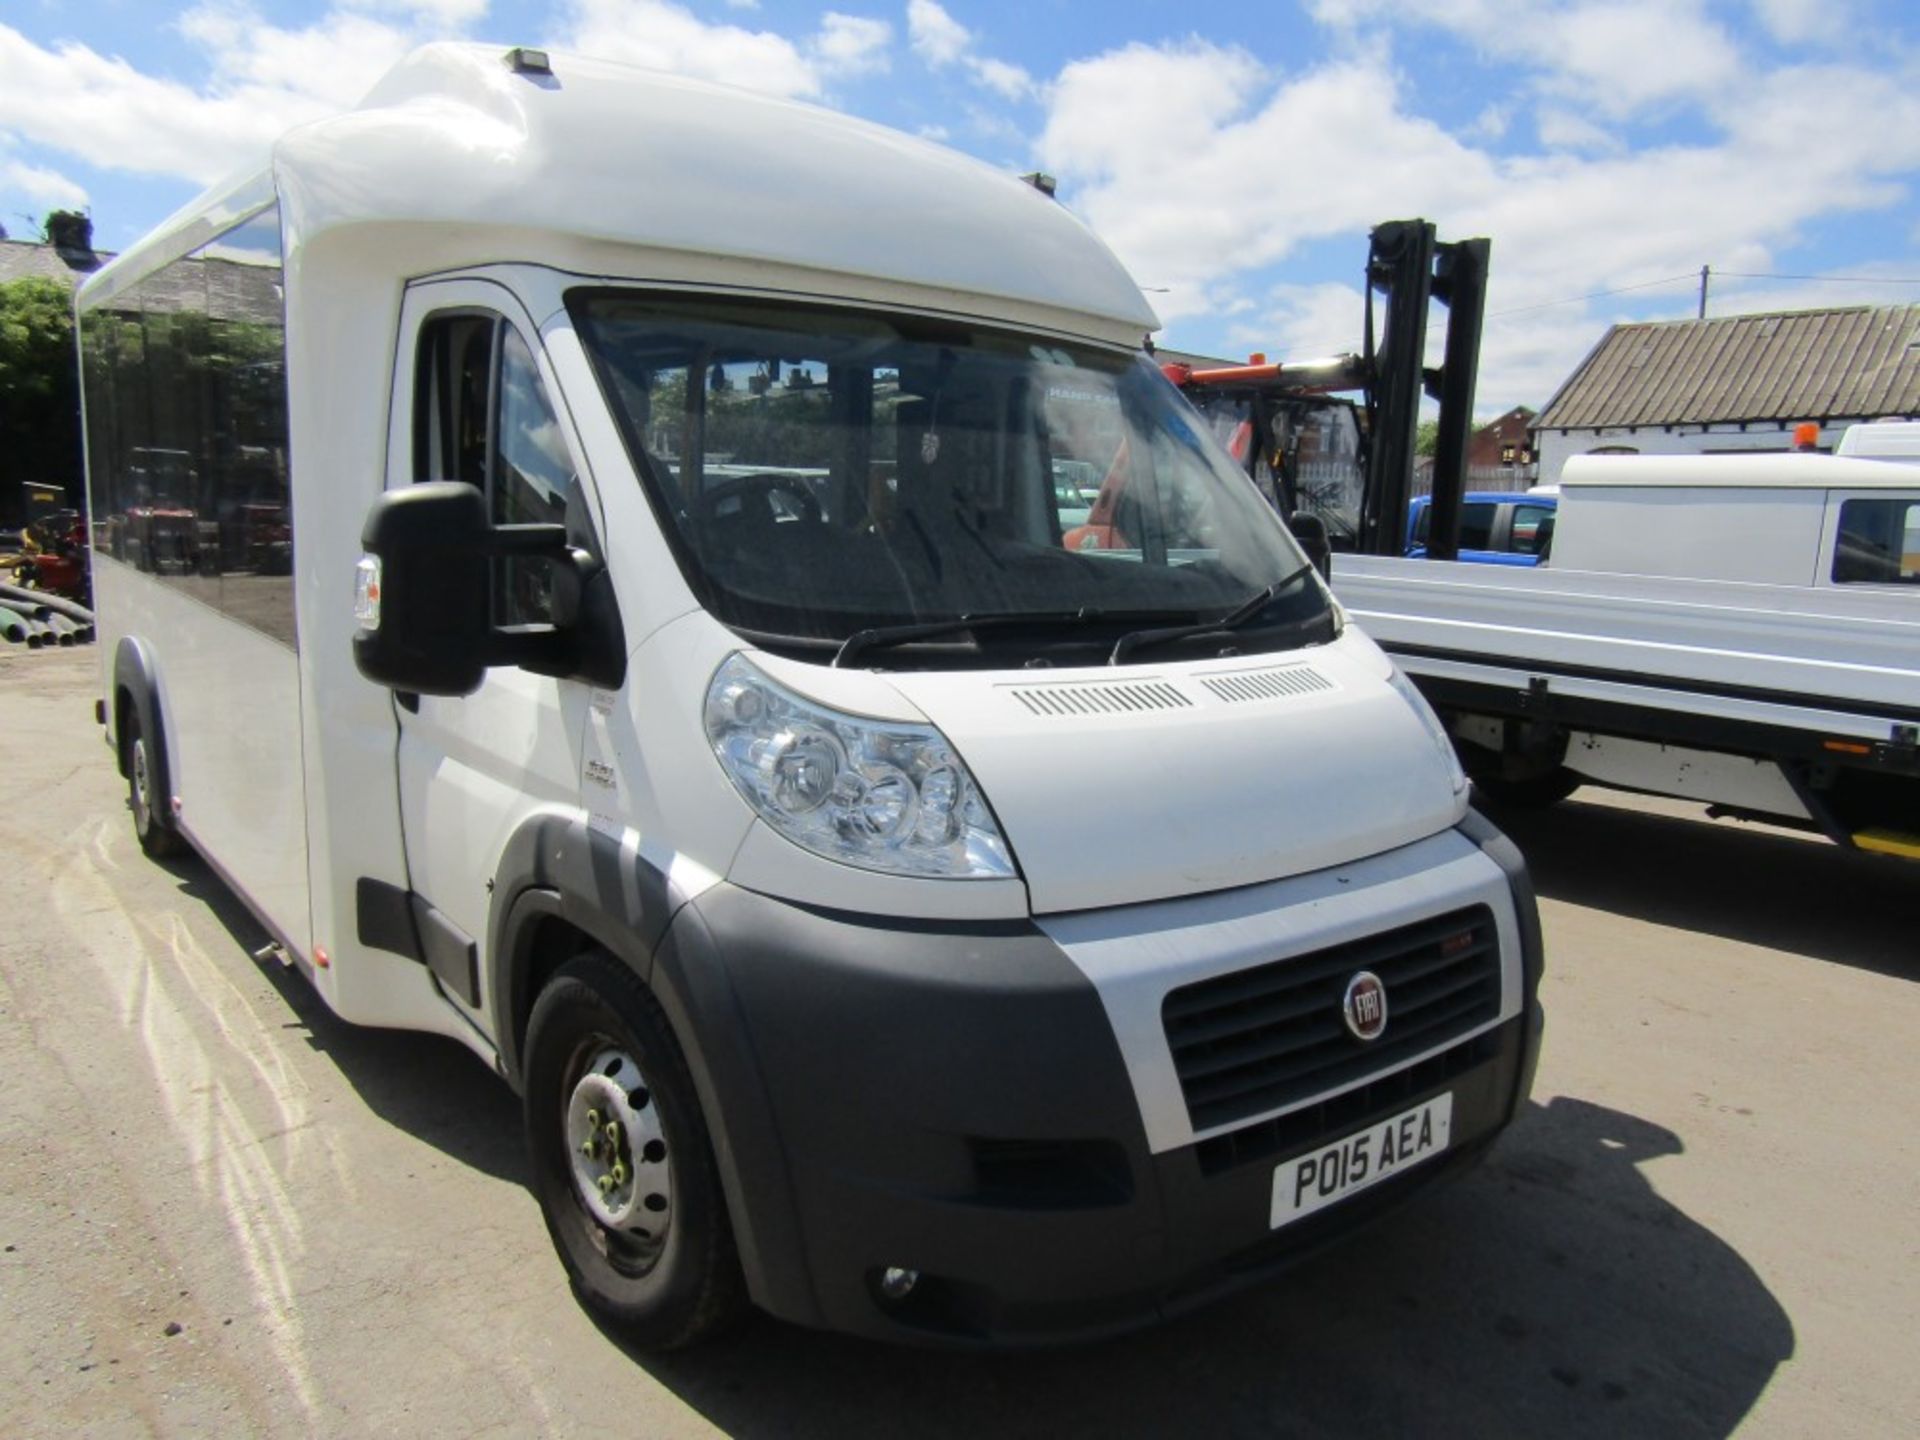 15 reg FIAT DUCATO TWIN AXLE MINIBUS (DIRECT COUNCIL) 1ST REG 08/15, 82686M, V5 HERE, 1 OWNER FROM